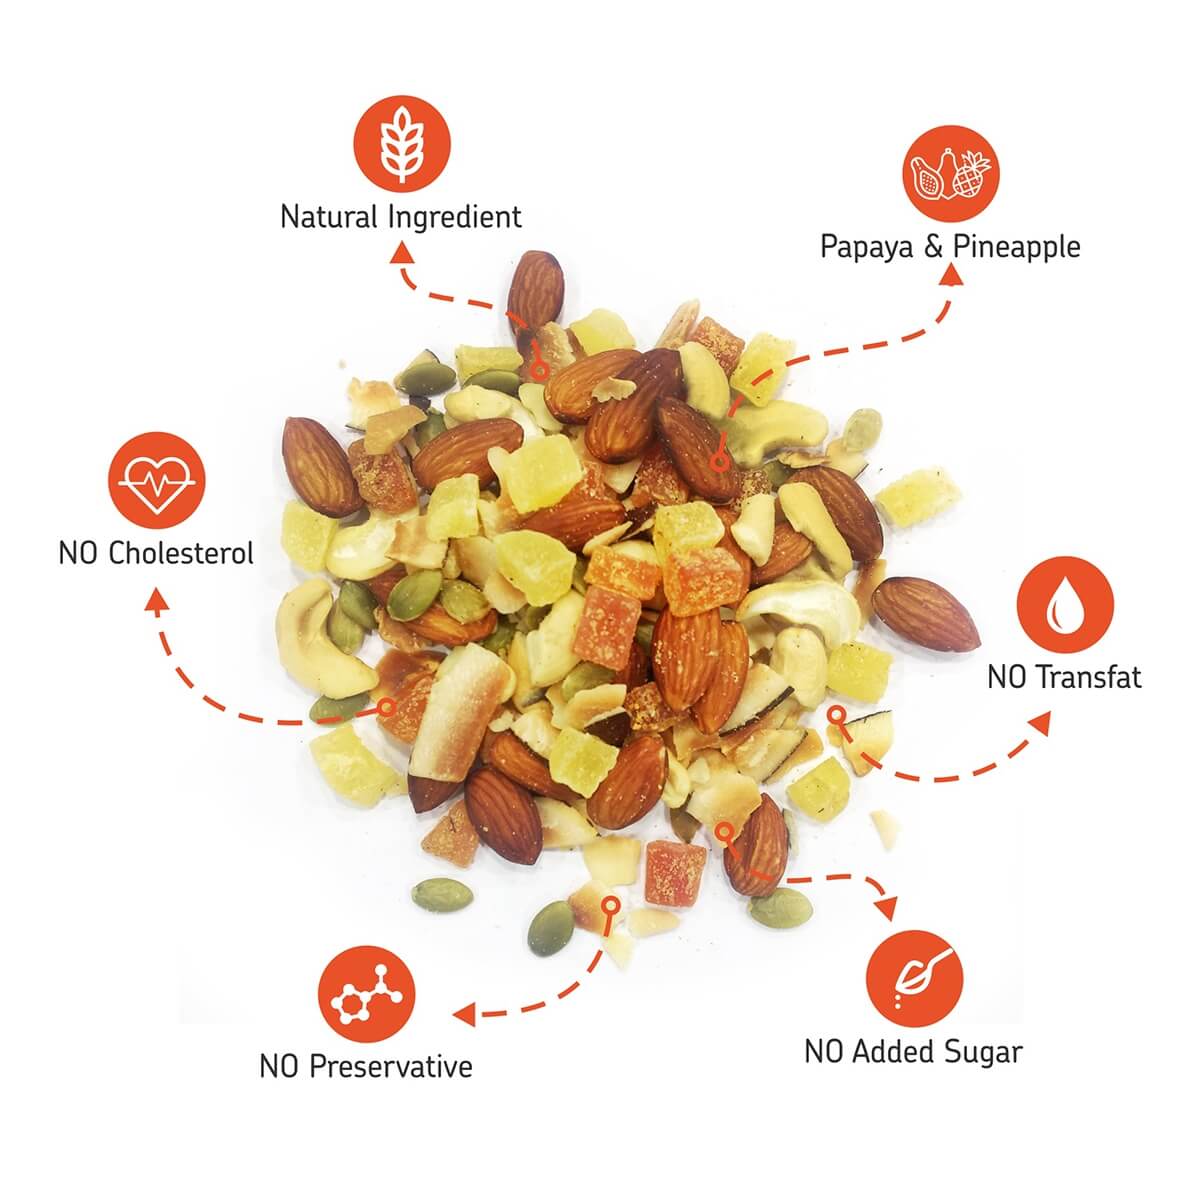 Discover Delight: Eat Anytime's Trail Mix Combo - Grab Yours Online